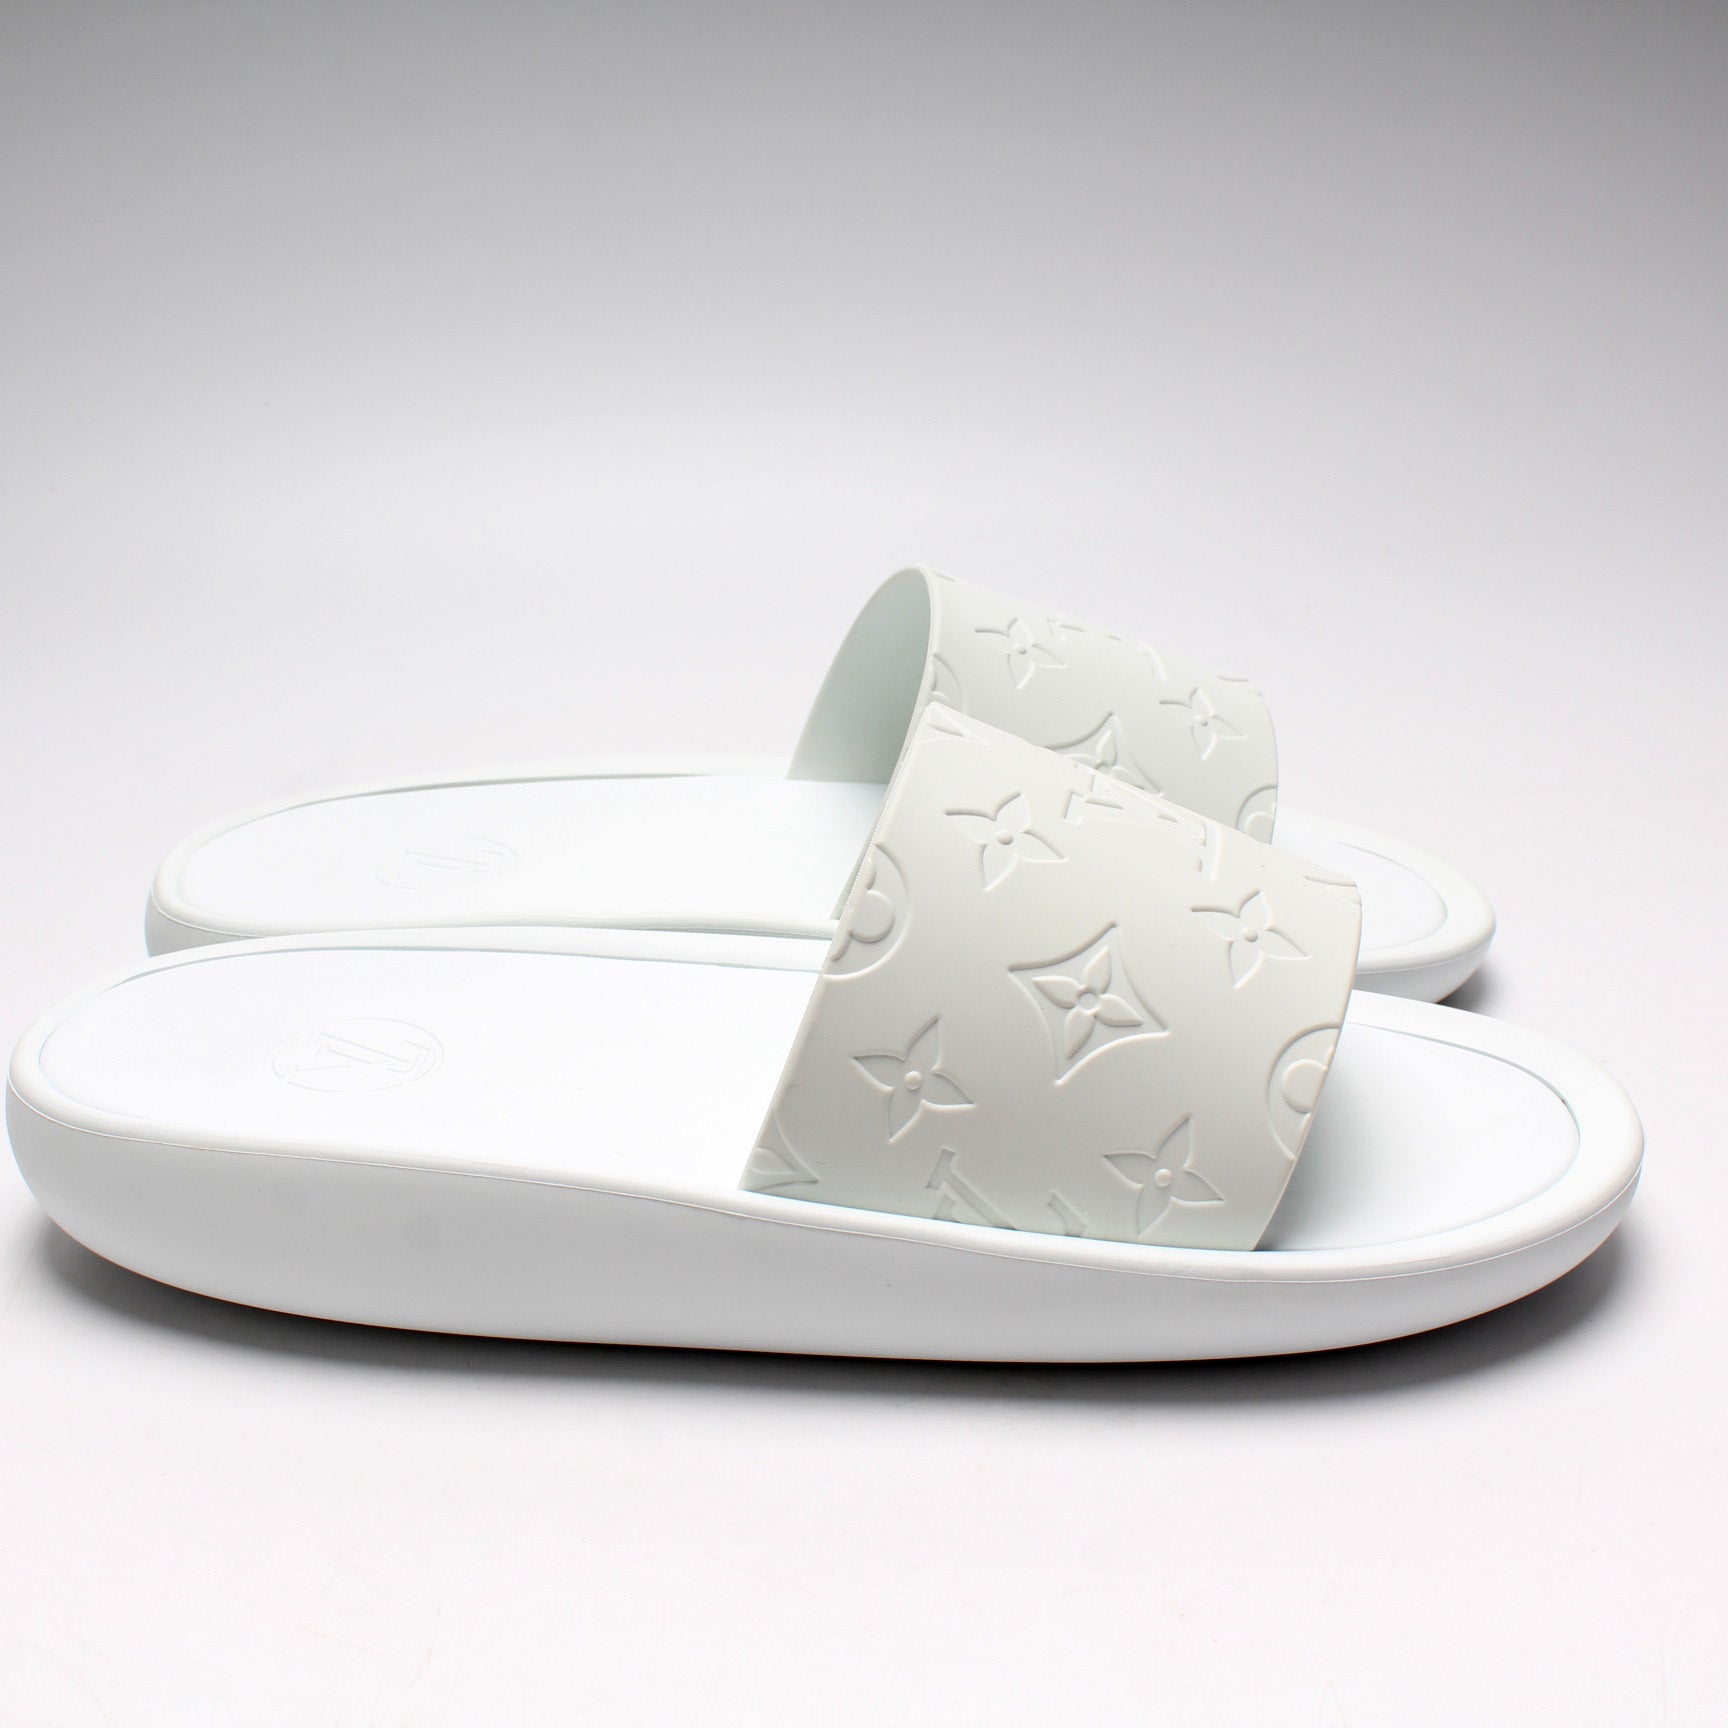 Louis Vuitton - Authenticated Waterfront Sandal - Rubber White For Man, Very Good condition